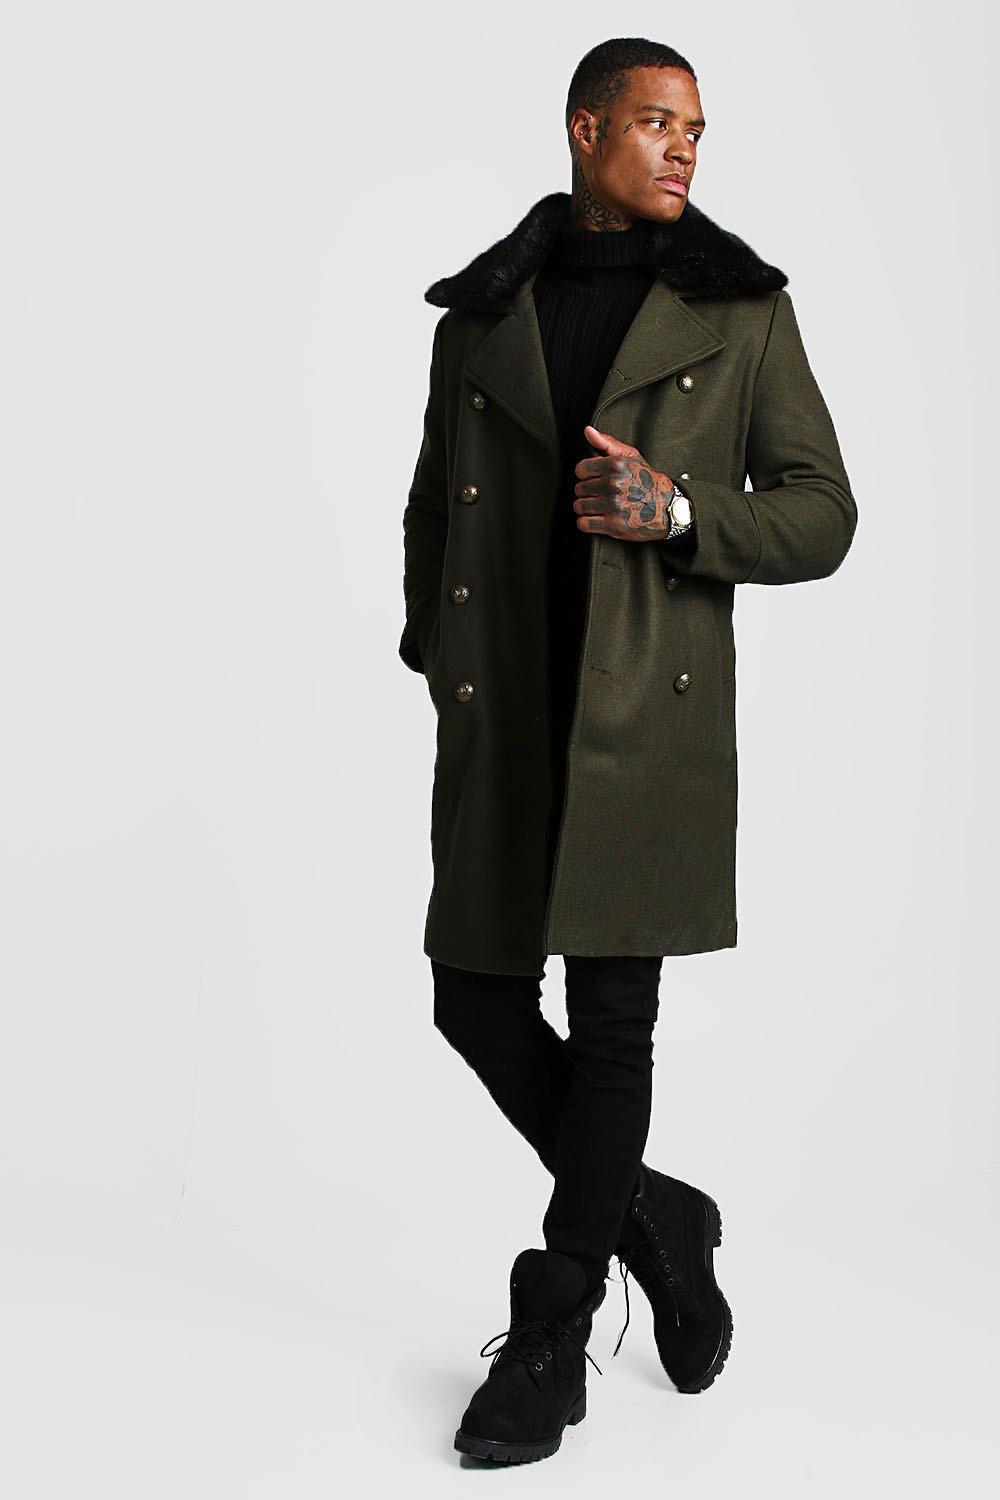 BoohooMAN Faux Fur Collar Military Style Overcoat for Men - Lyst